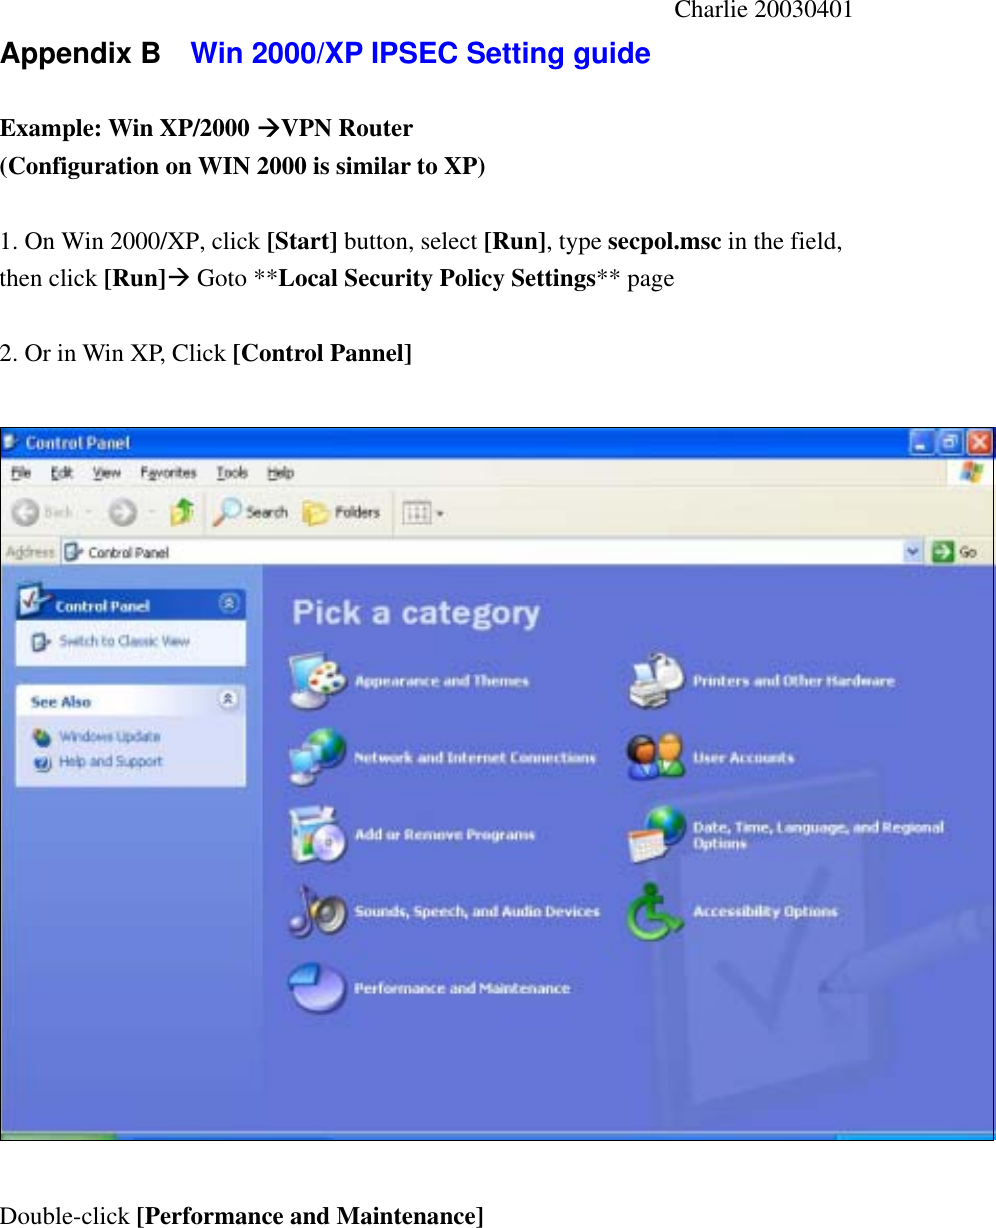                                                       Charlie 20030401 Appendix B    Win 2000/XP IPSEC Setting guide    Example: Win XP/2000 VPN Router   (Configuration on WIN 2000 is similar to XP)  1. On Win 2000/XP, click [Start] button, select [Run], type secpol.msc in the field, then click [Run] Goto **Local Security Policy Settings** page  2. Or in Win XP, Click [Control Pannel]    Double-click [Performance and Maintenance] 